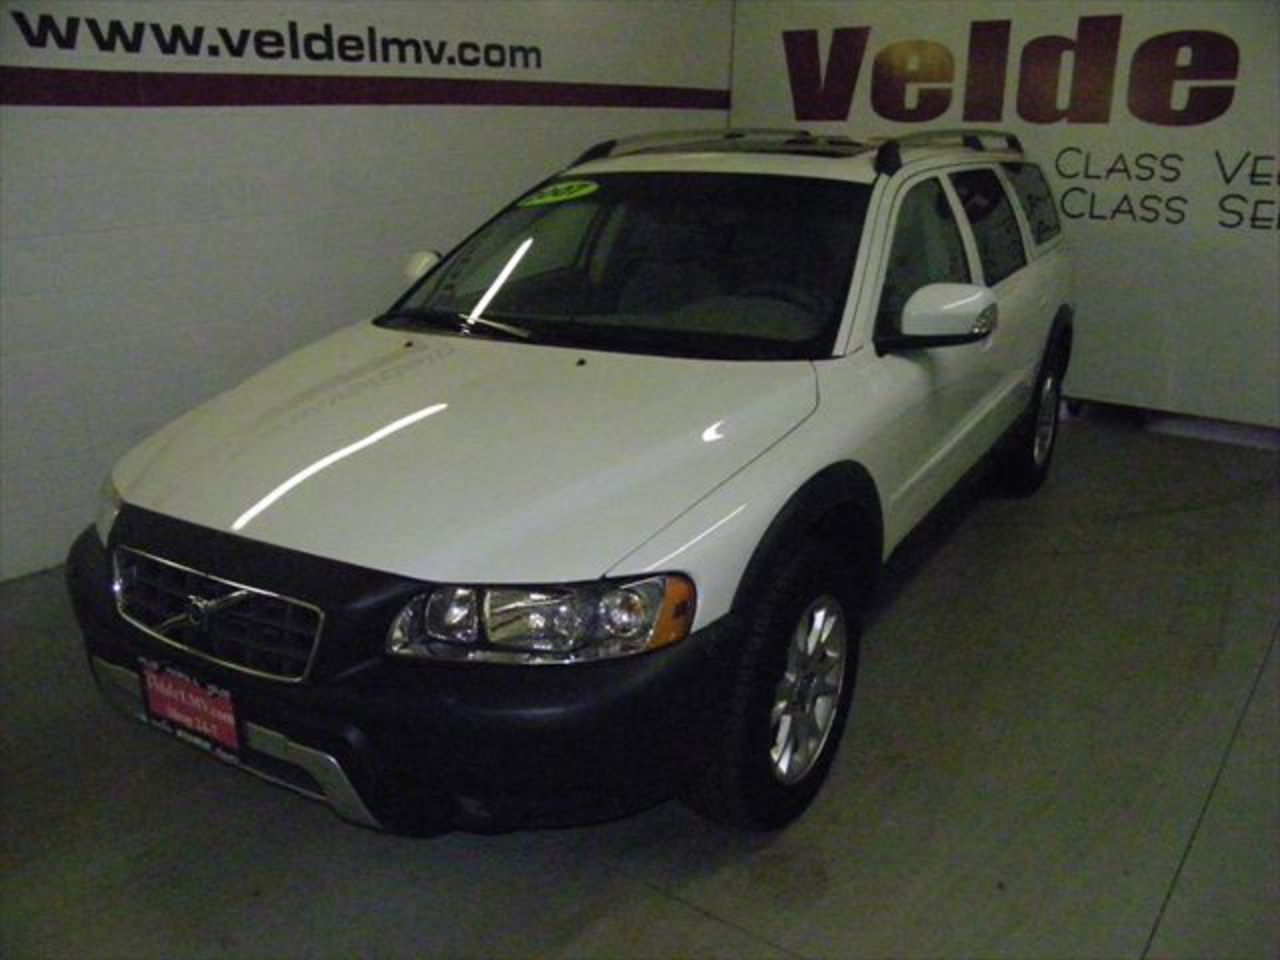 Volvo XC 70 25T Cross Country. View Download Wallpaper. 640x480. Comments